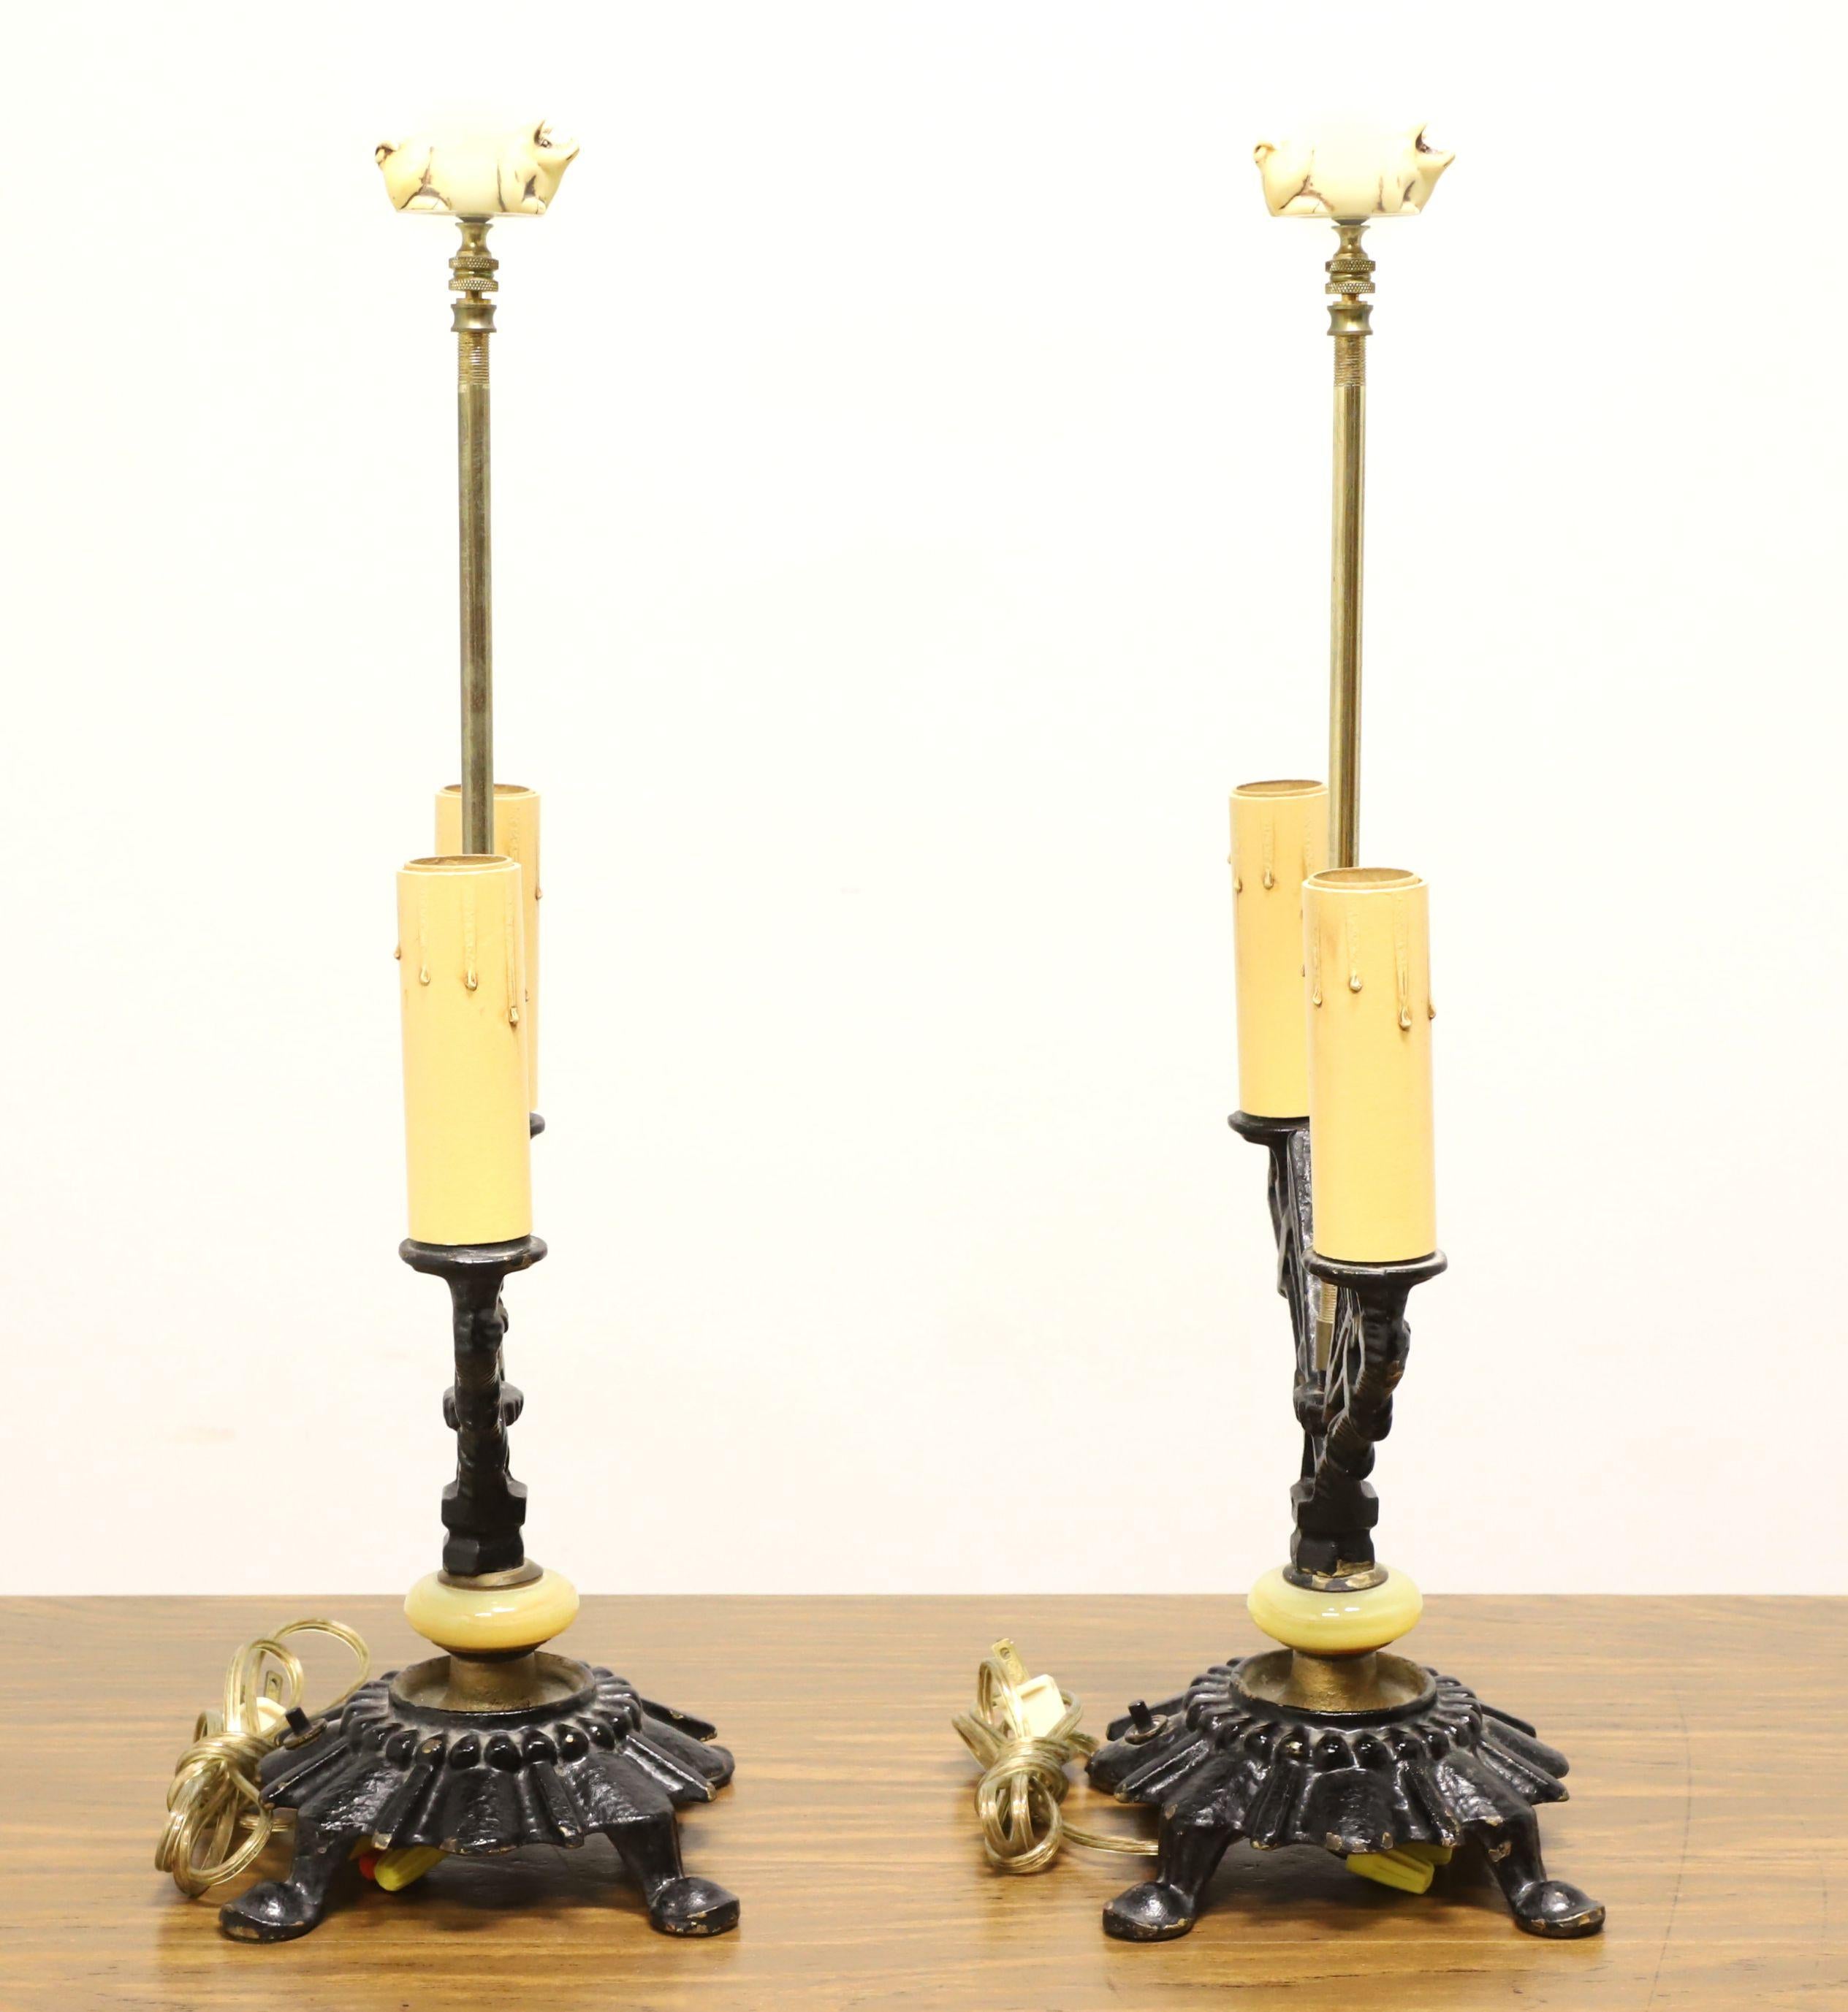 A pair of Art Deco style dual light table lamps, unbranded. Made of black painted metal in a uniquely designed dual candlestick shape, cream colored plastic bulb socket with faux dripped wax to give appearance of a candle, decorative cream color